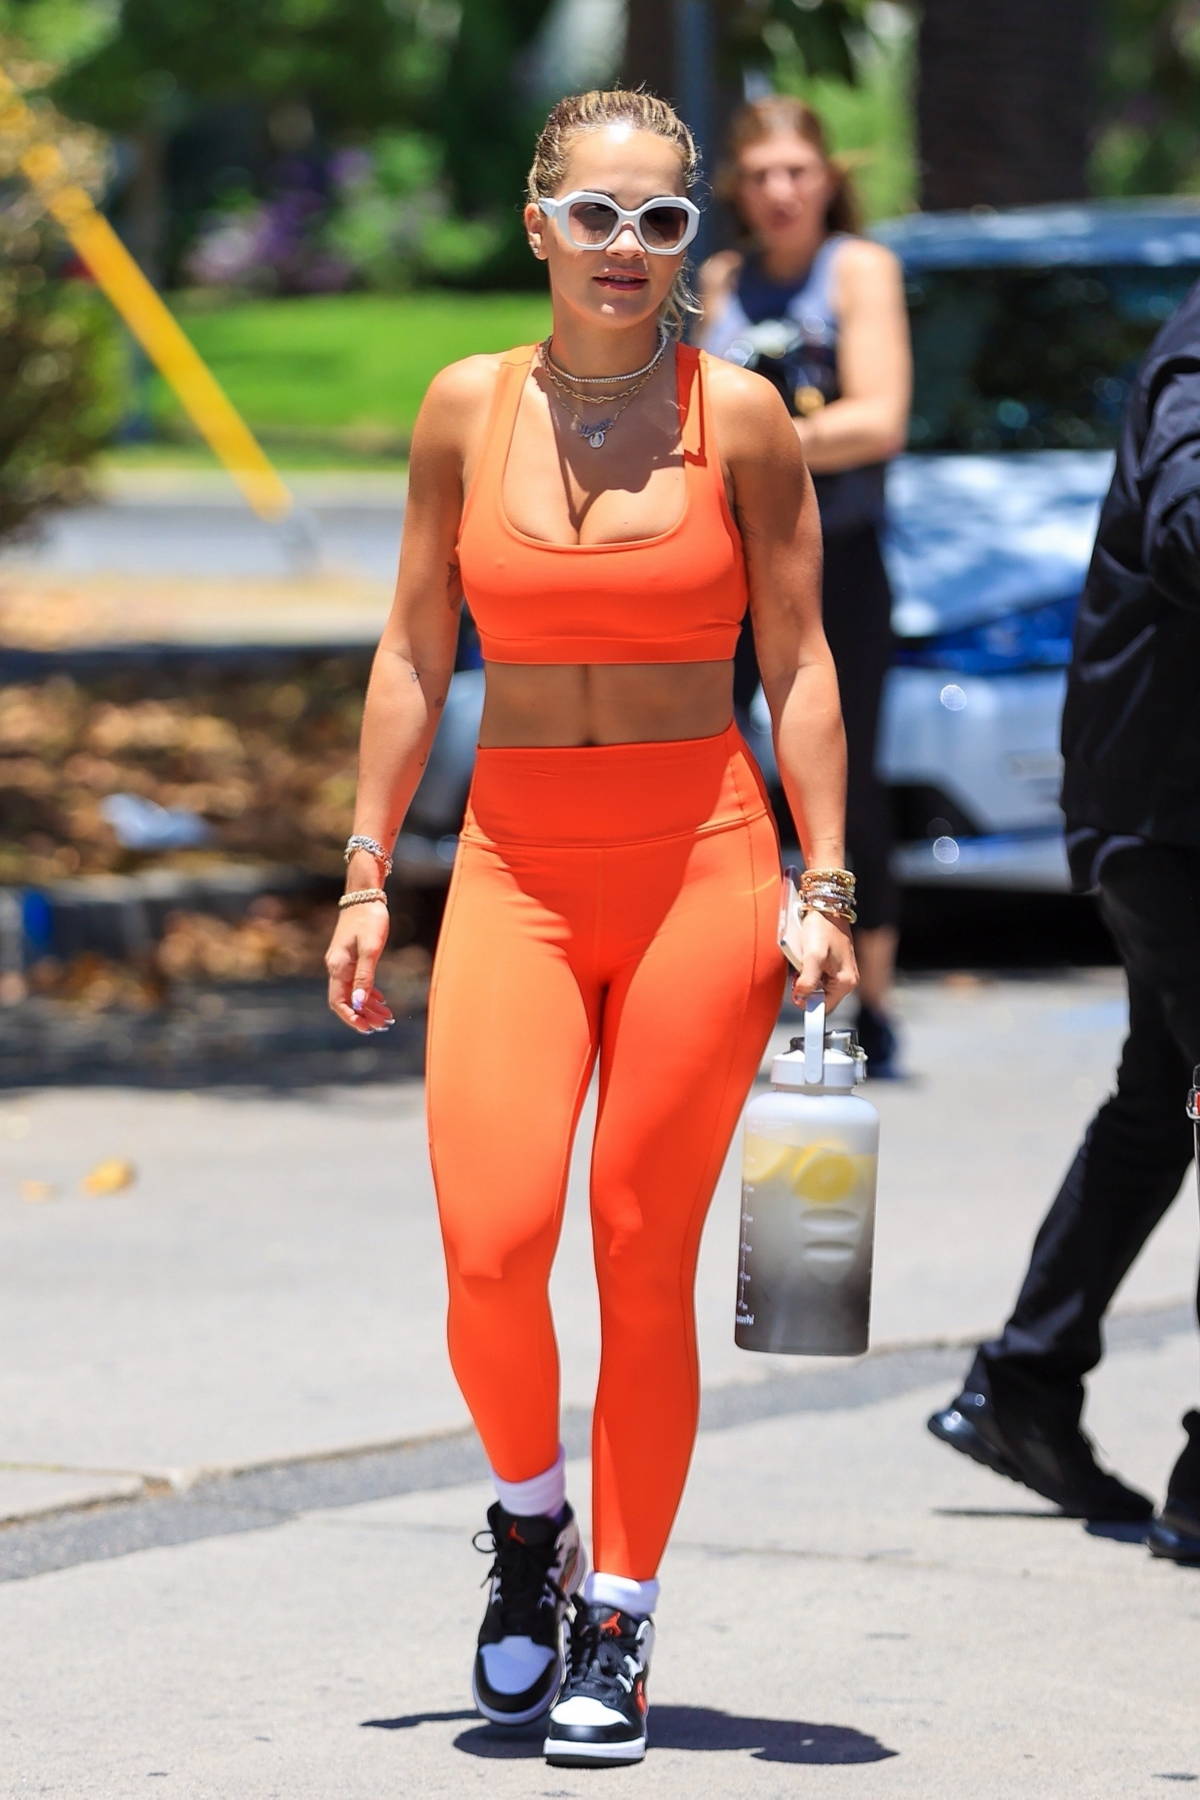 Rita Ora shows off her toned physique in a bright orange outfit